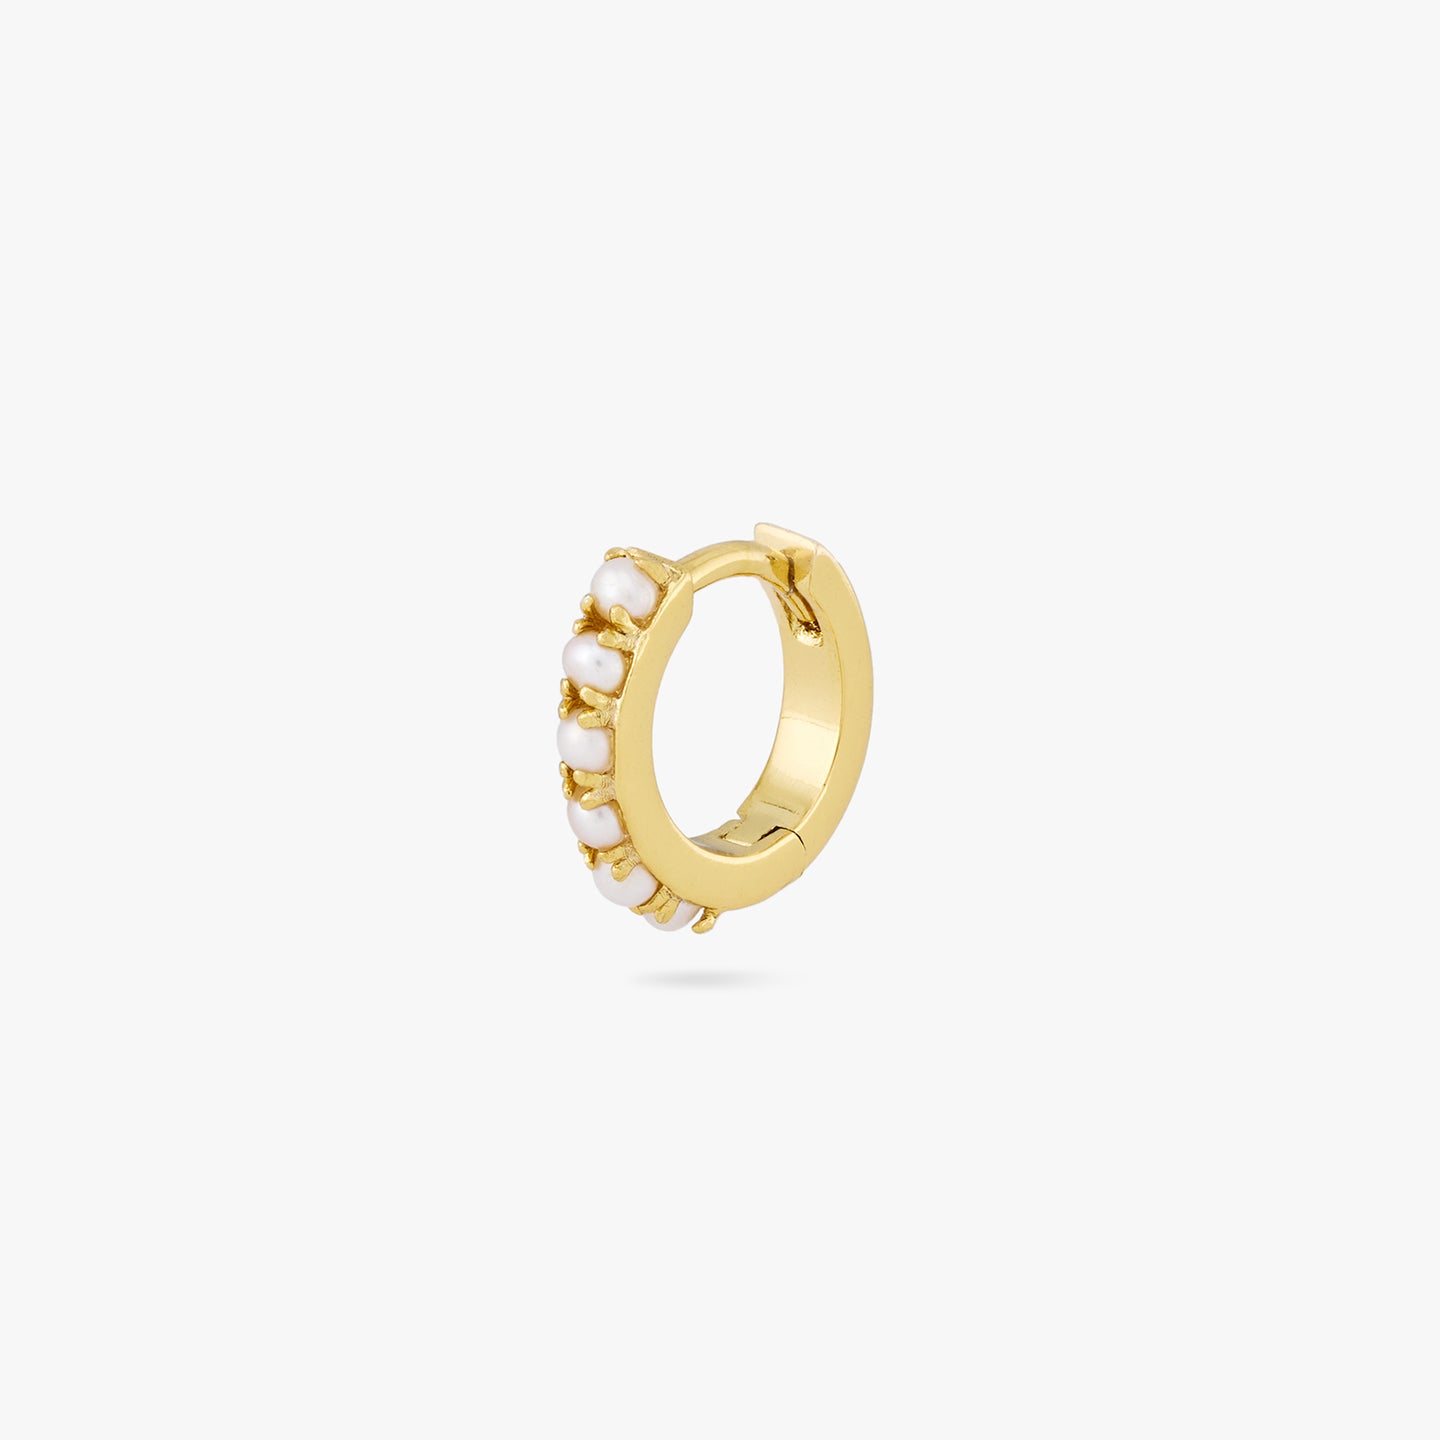 This is a small gold huggie that has small pearls lining the front of it color:null|gold